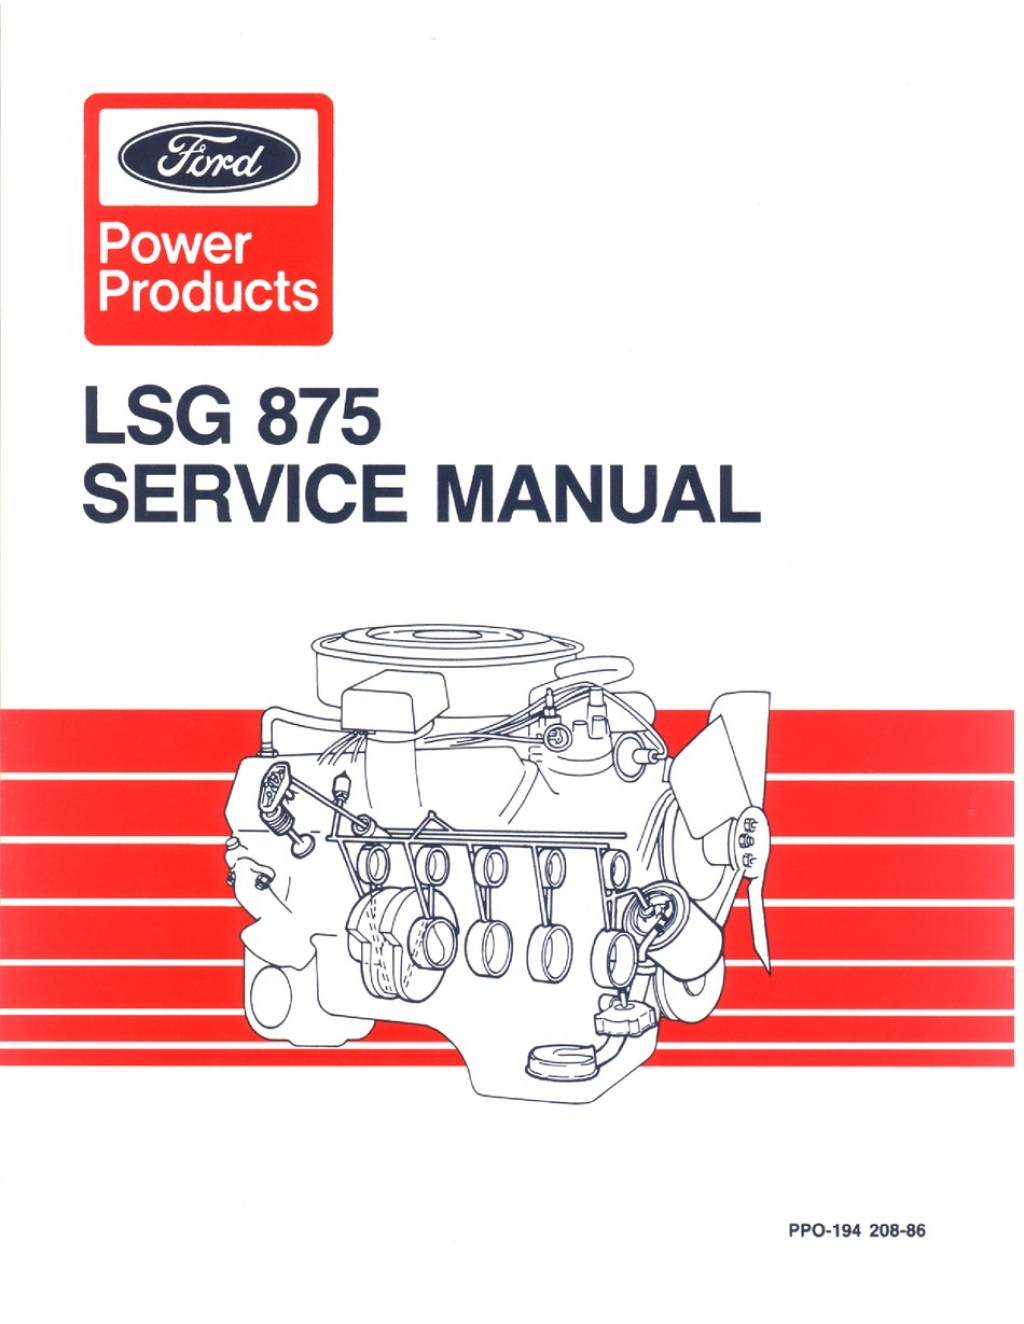 Picture of: FORD LSG  SERVICE MANUAL Pdf Download  ManualsLib